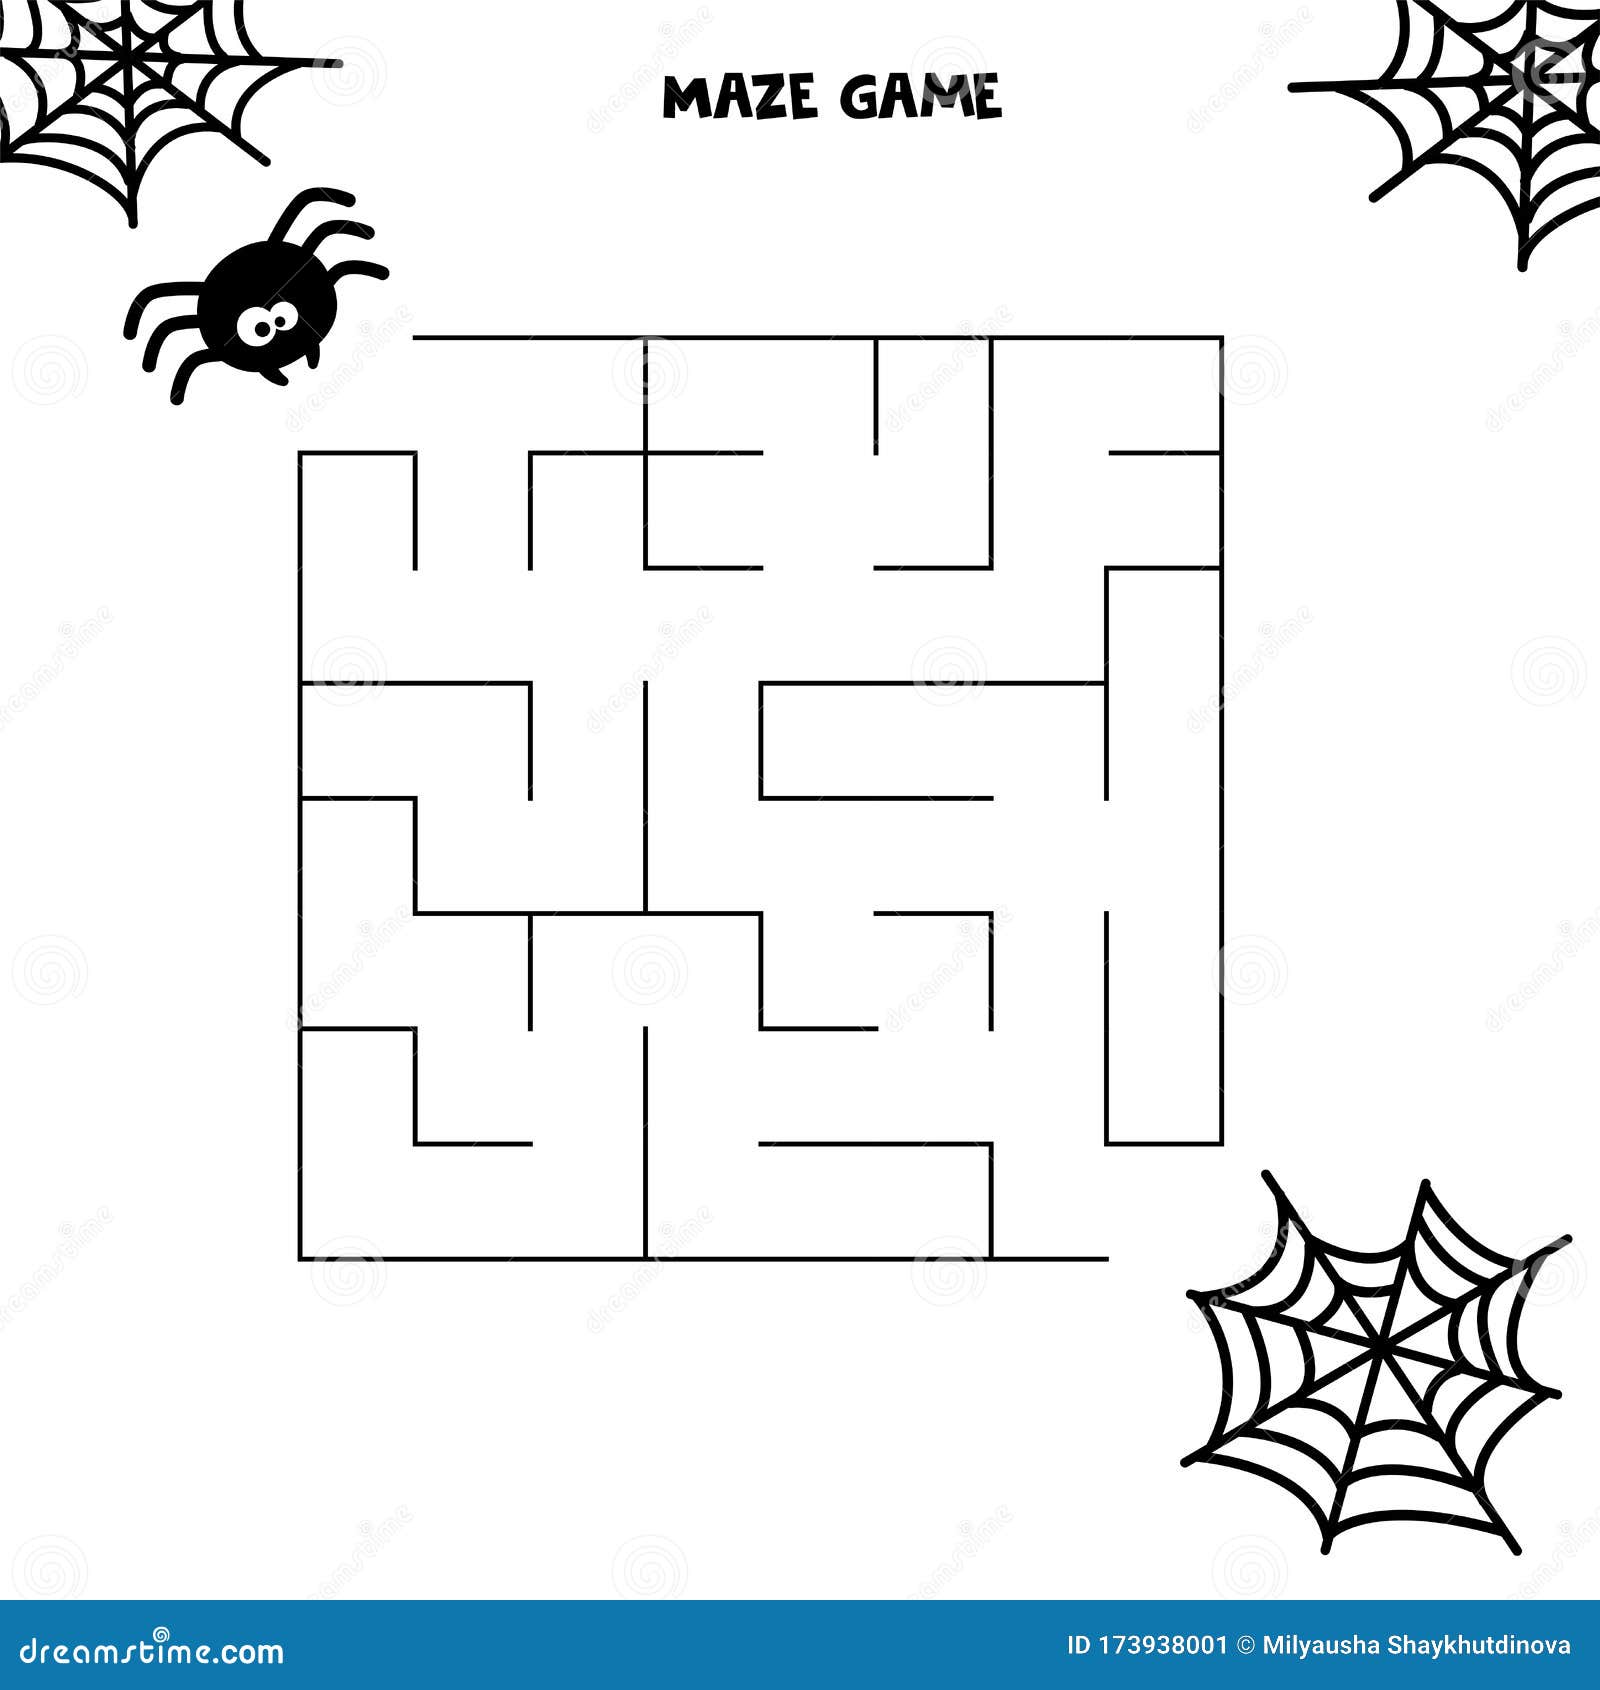 spider-web-maze-party-game-equitygaret